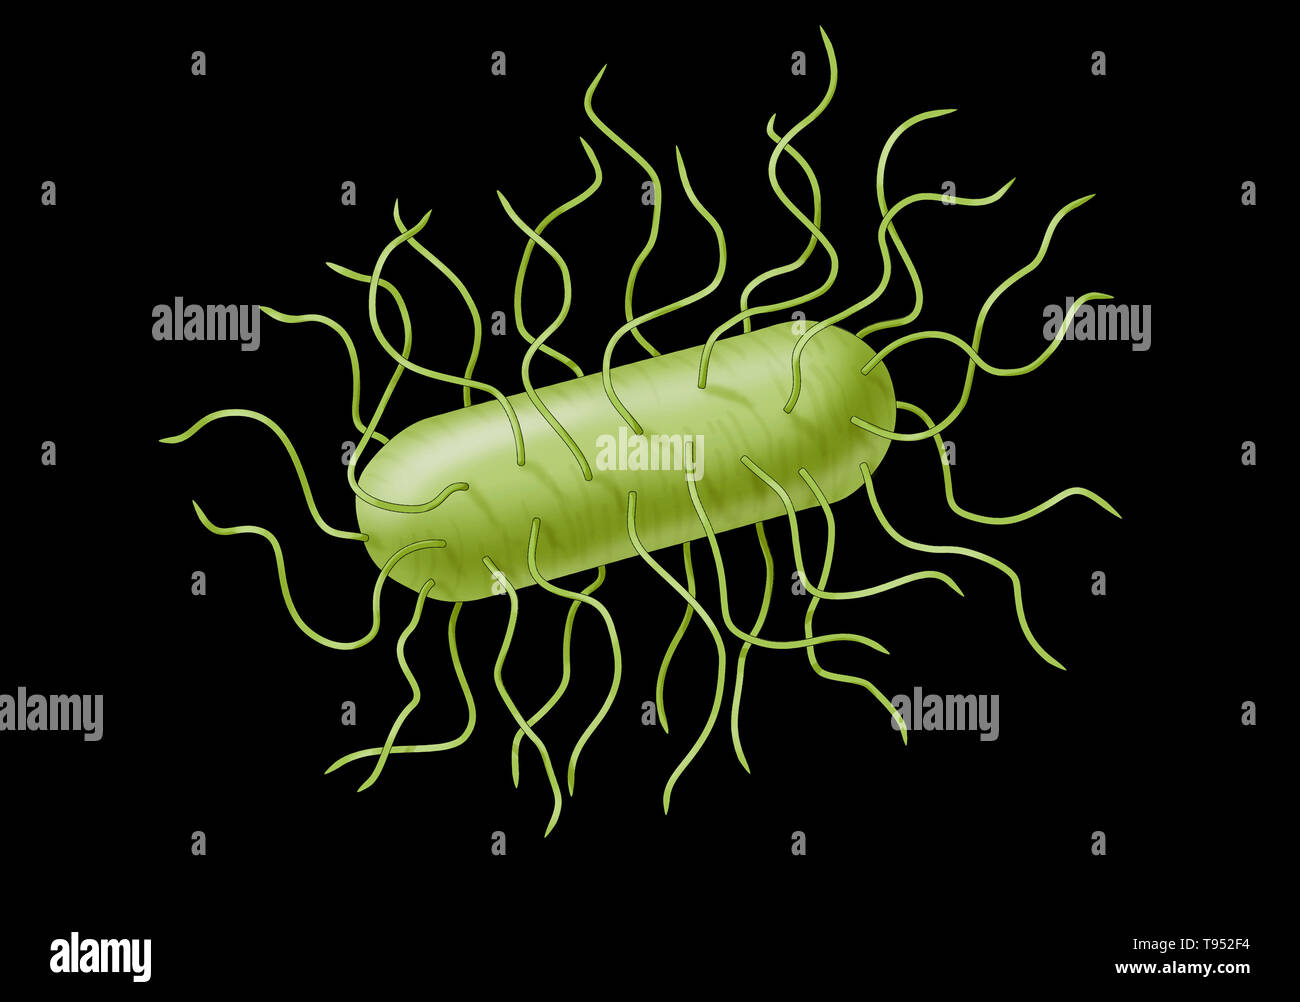 E. coli bacteria. Escherichia coli is a gram-negative, facultatively anaerobic, rod-shaped, coliform bacterium of the genus Escherichia that is commonly found in the lower intestine of warm-blooded organisms (endotherms). Most E. coli strains are harmless, but some serotypes can cause serious food poisoning in their hosts, and are occasionally responsible for product recalls due to food contamination. Stock Photo